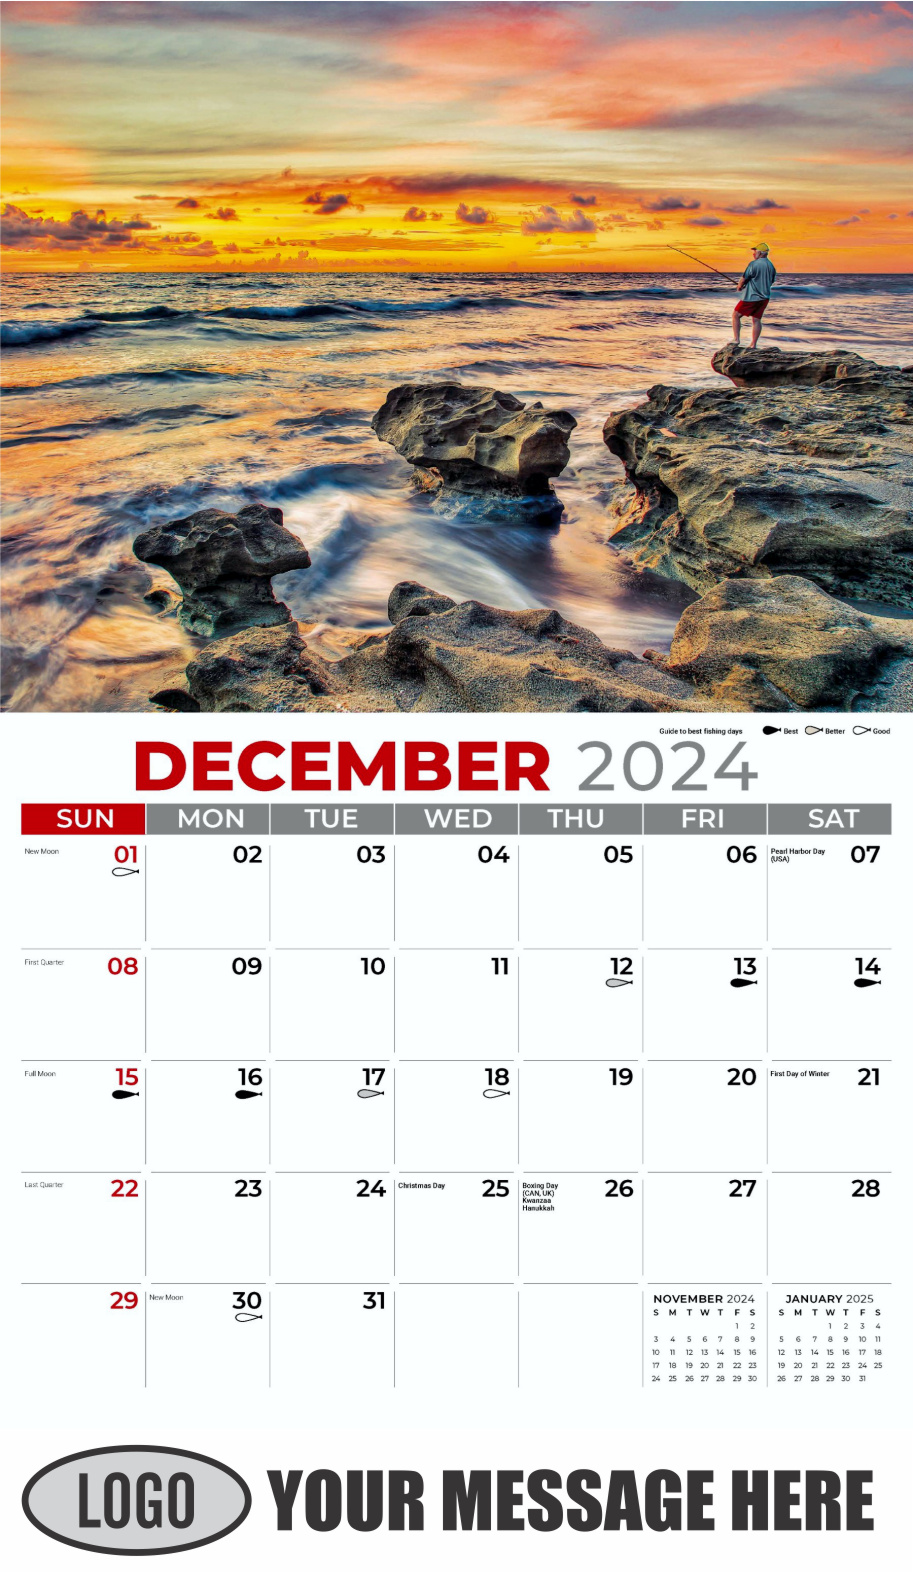 Fishing and Hunting 2024 Business Promotion Calendar - December